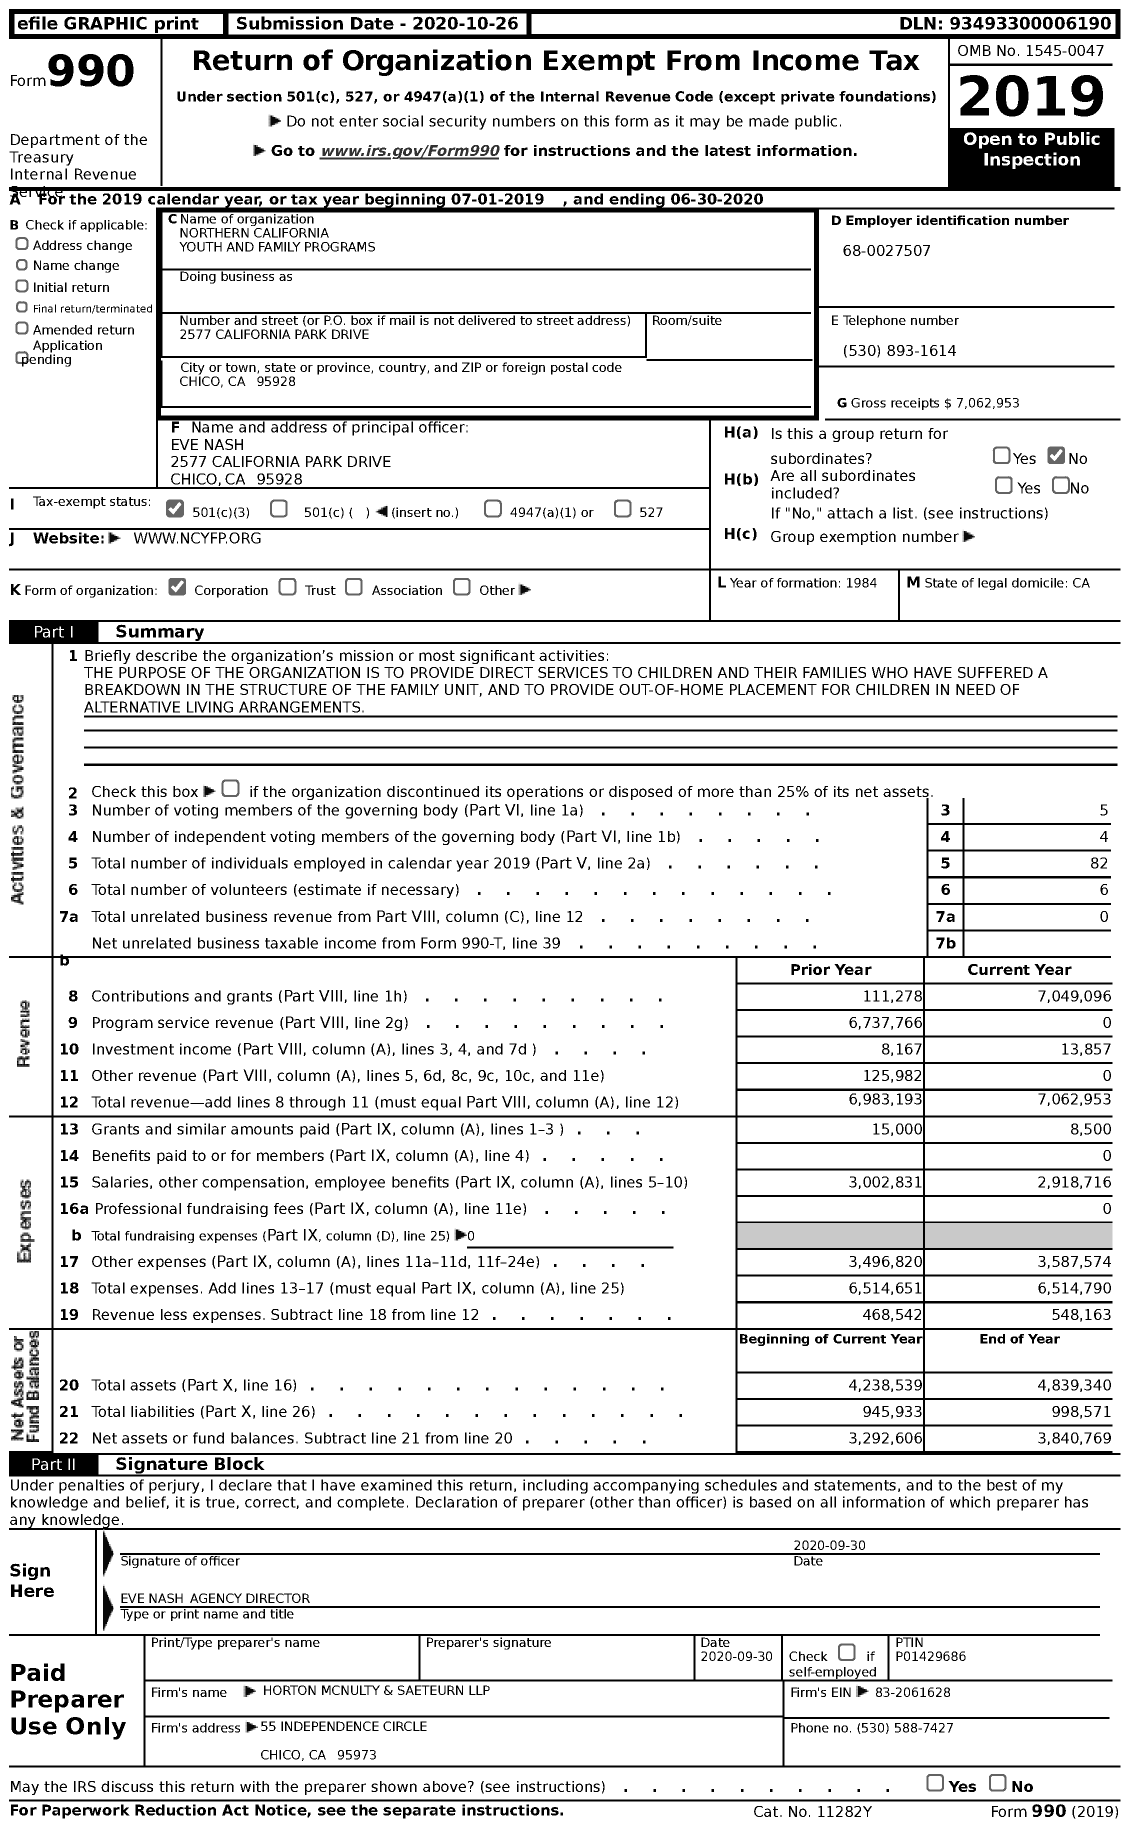 Image of first page of 2019 Form 990 for Youth and Family Programs